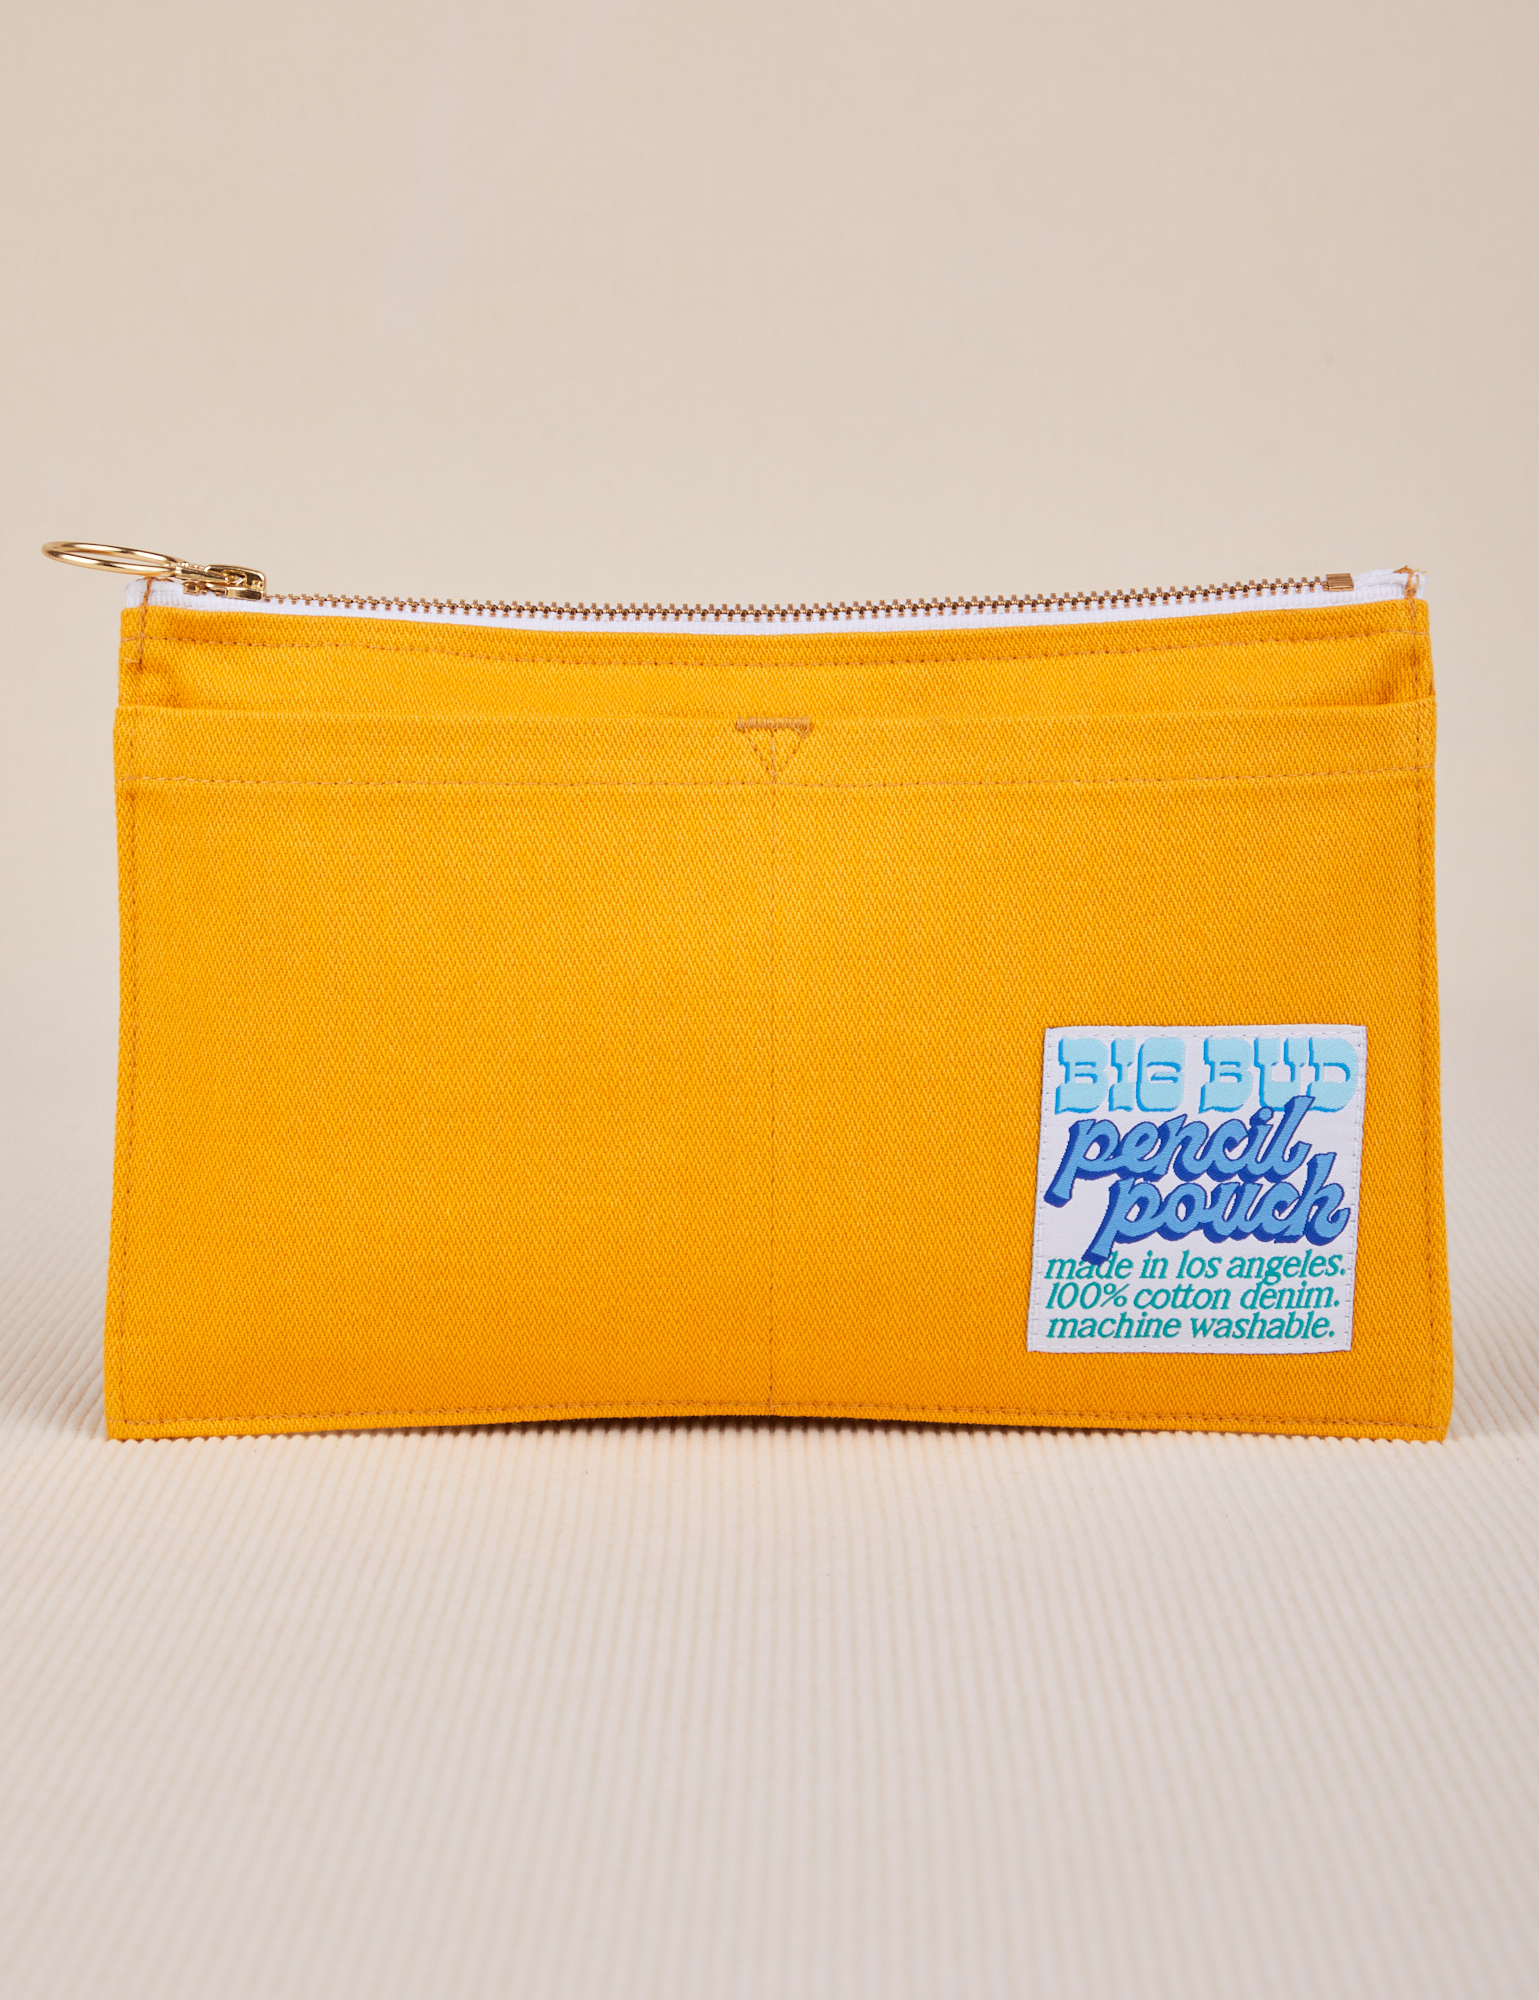 Pencil Pouch in Mustard Yellow